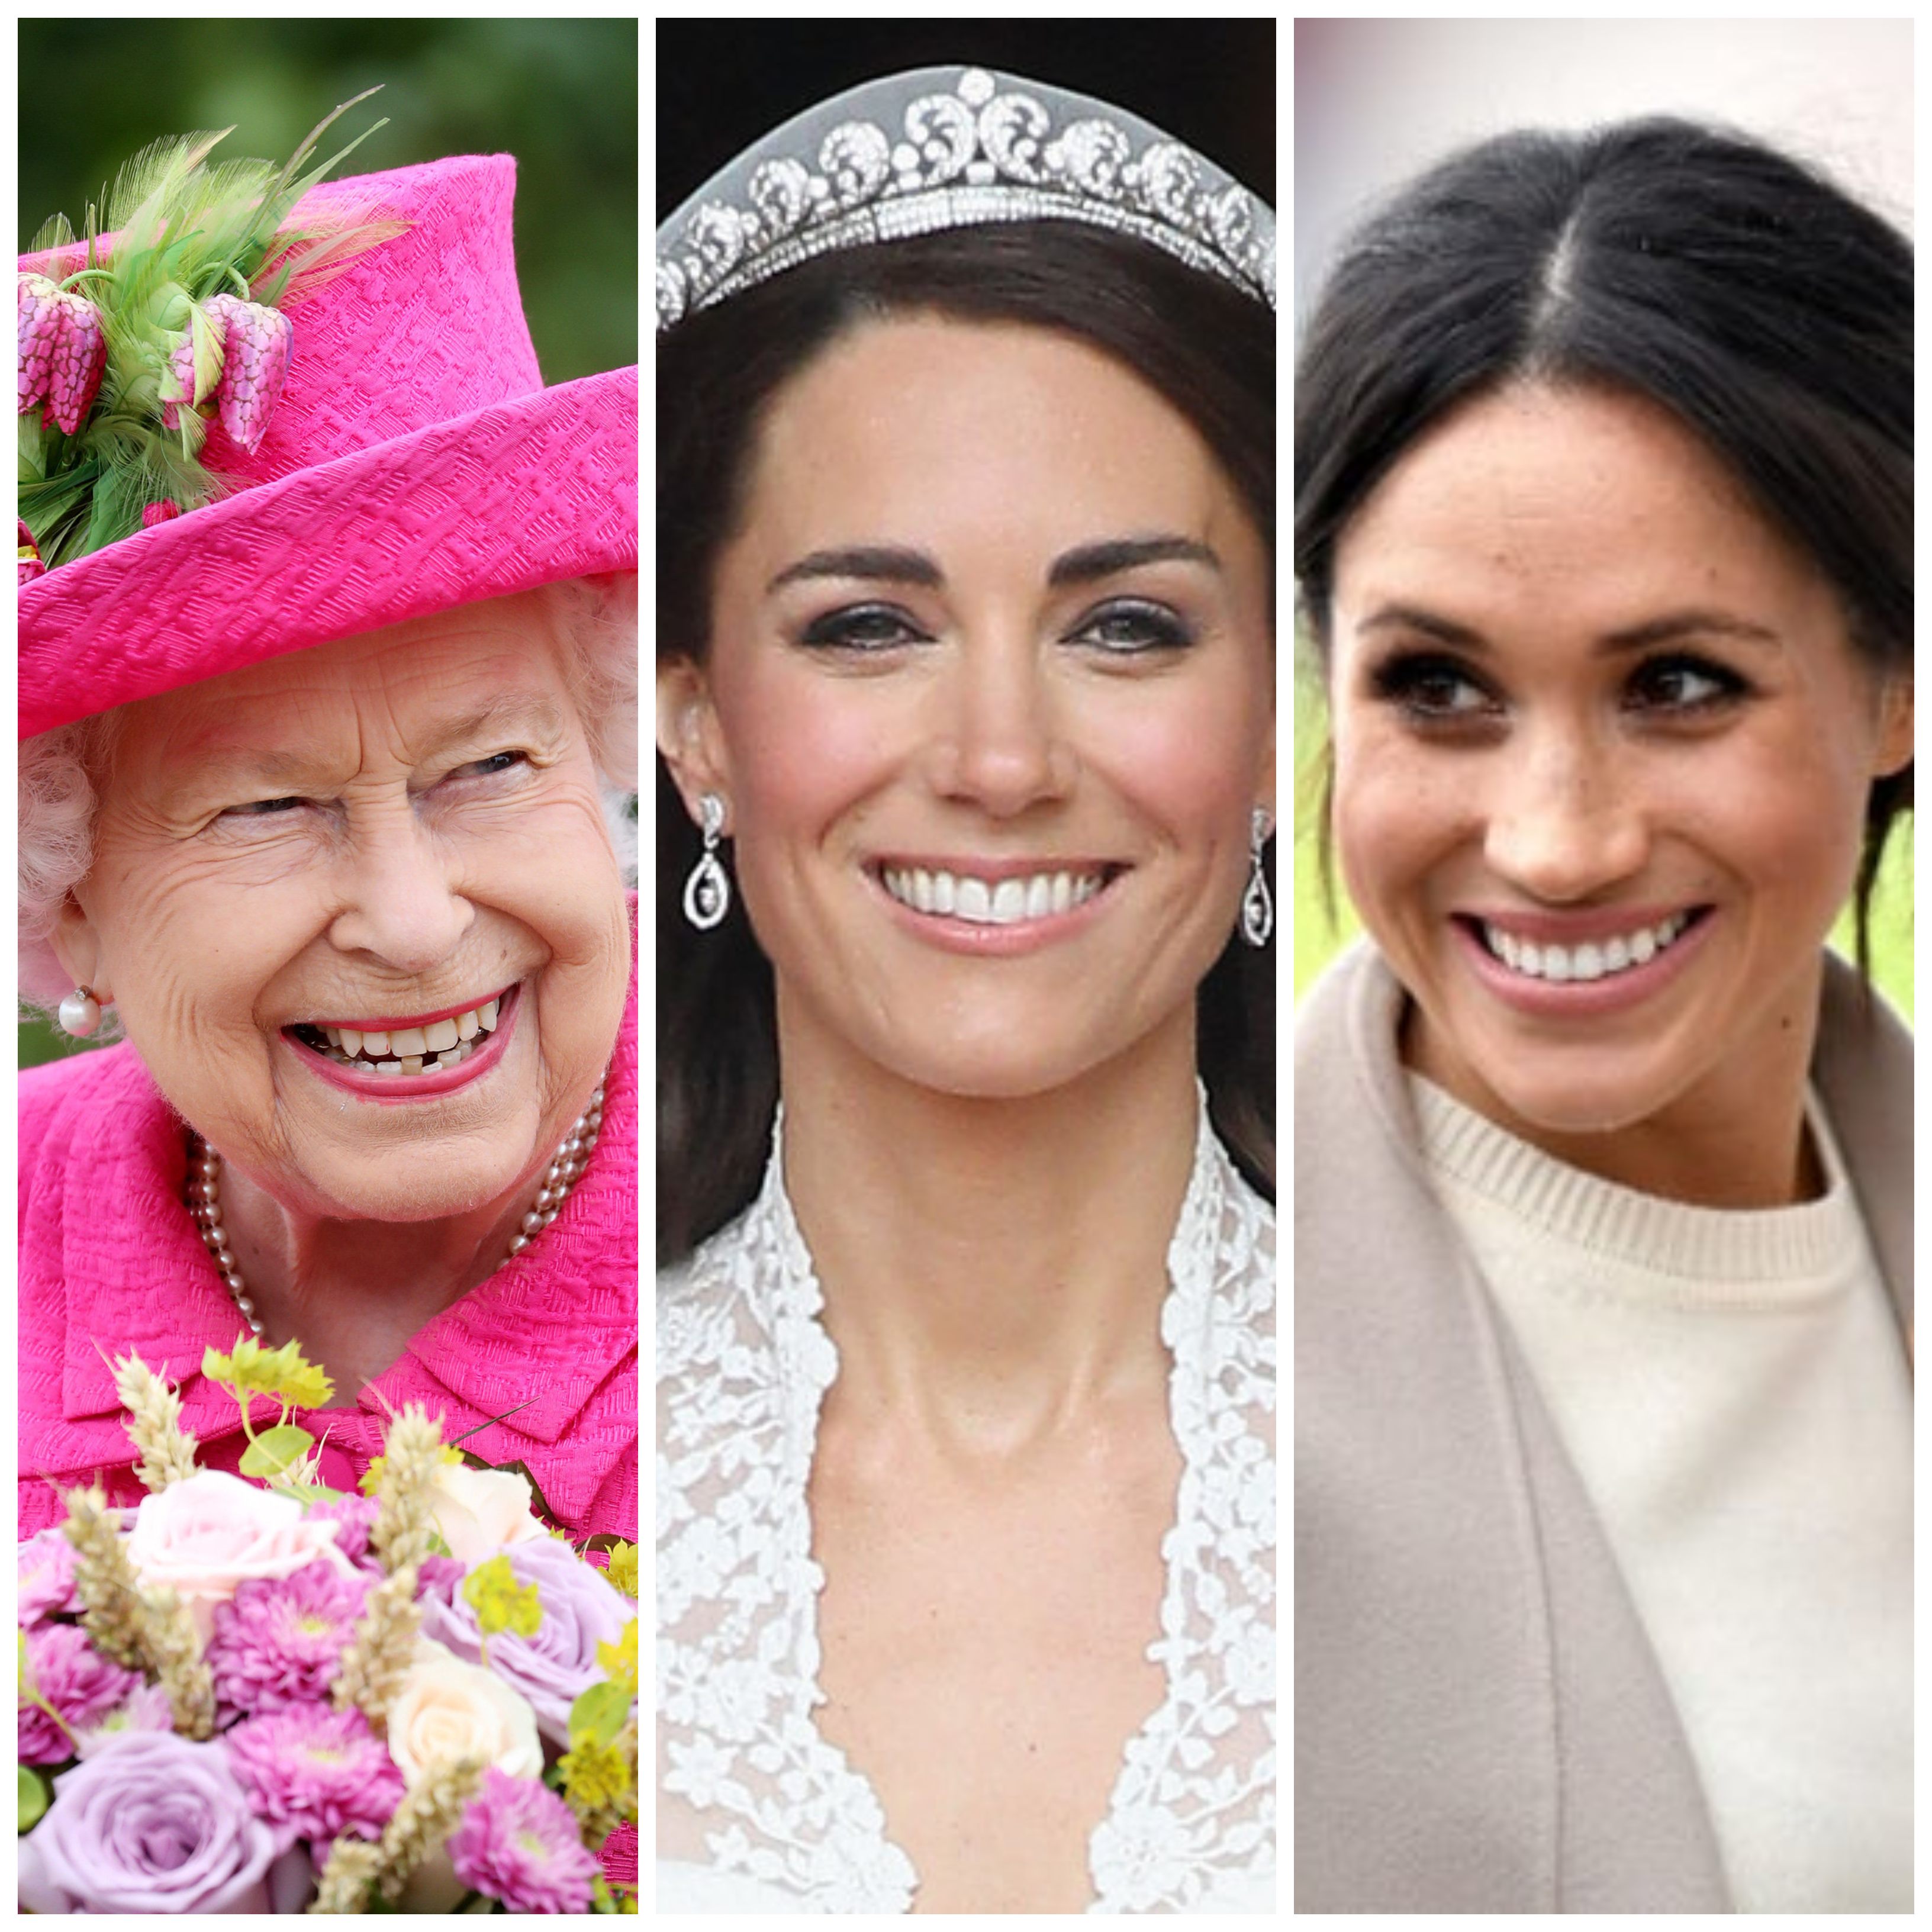 queen elizabeth does her own makeup except for one occasion